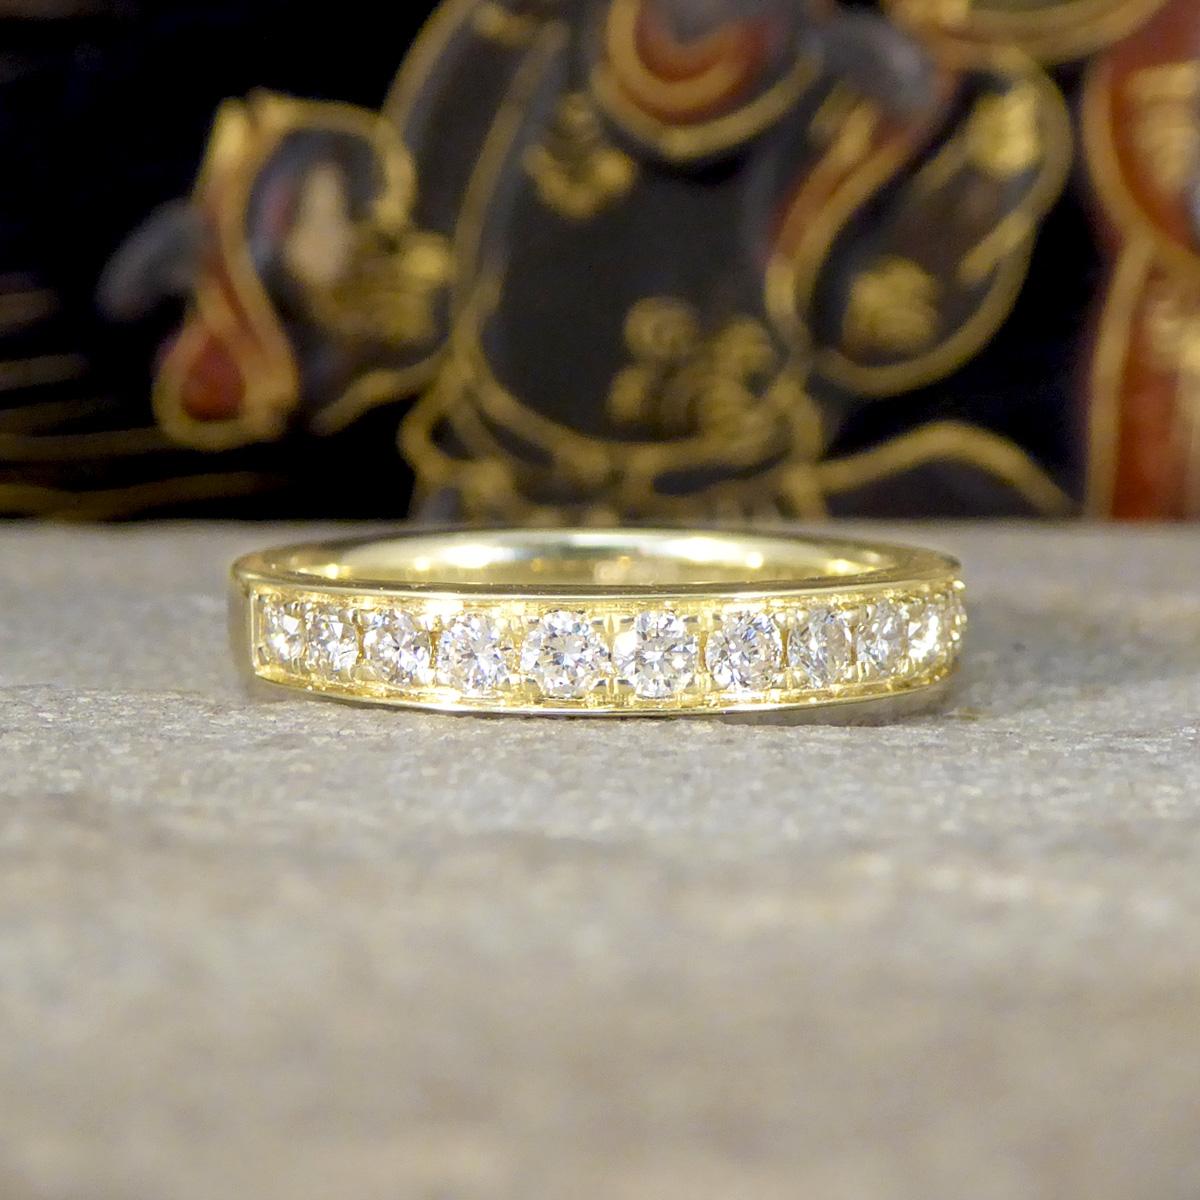 An exquisite 0.50ct Diamond Half Eternity Ring. This ring is a timeless symbol of love and sophistication. Crafted in lustrous 9ct Yellow Gold for durability, this ring features a classic Channel Claw Setting, elegantly showcasing a half-circle of